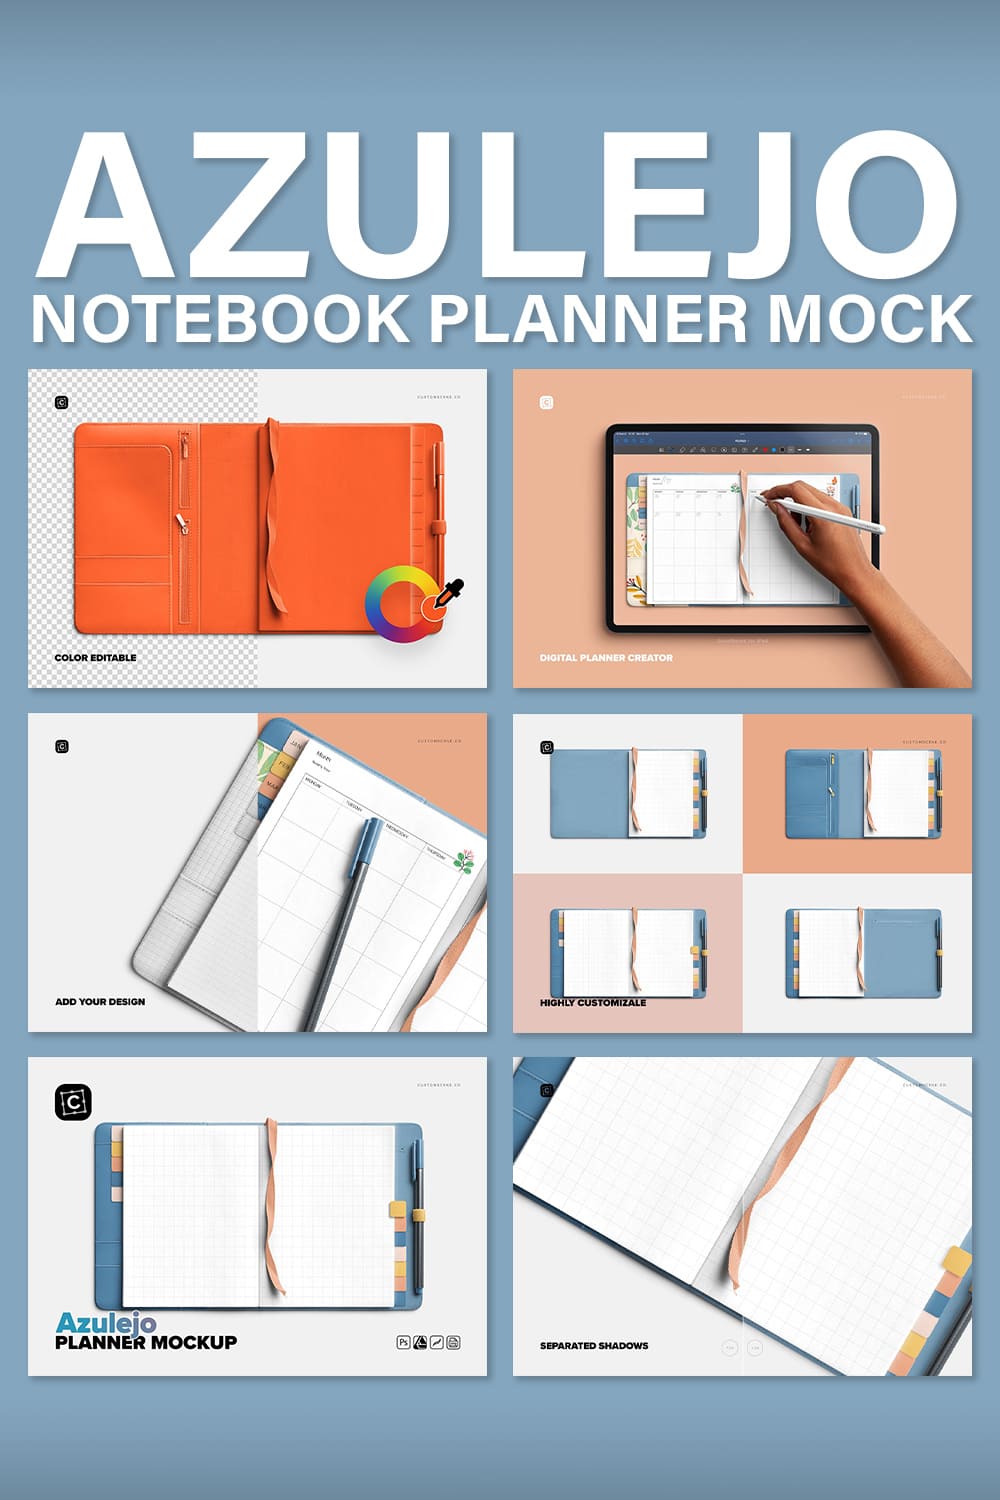 Pinterest image of a blue pack of notebooks.